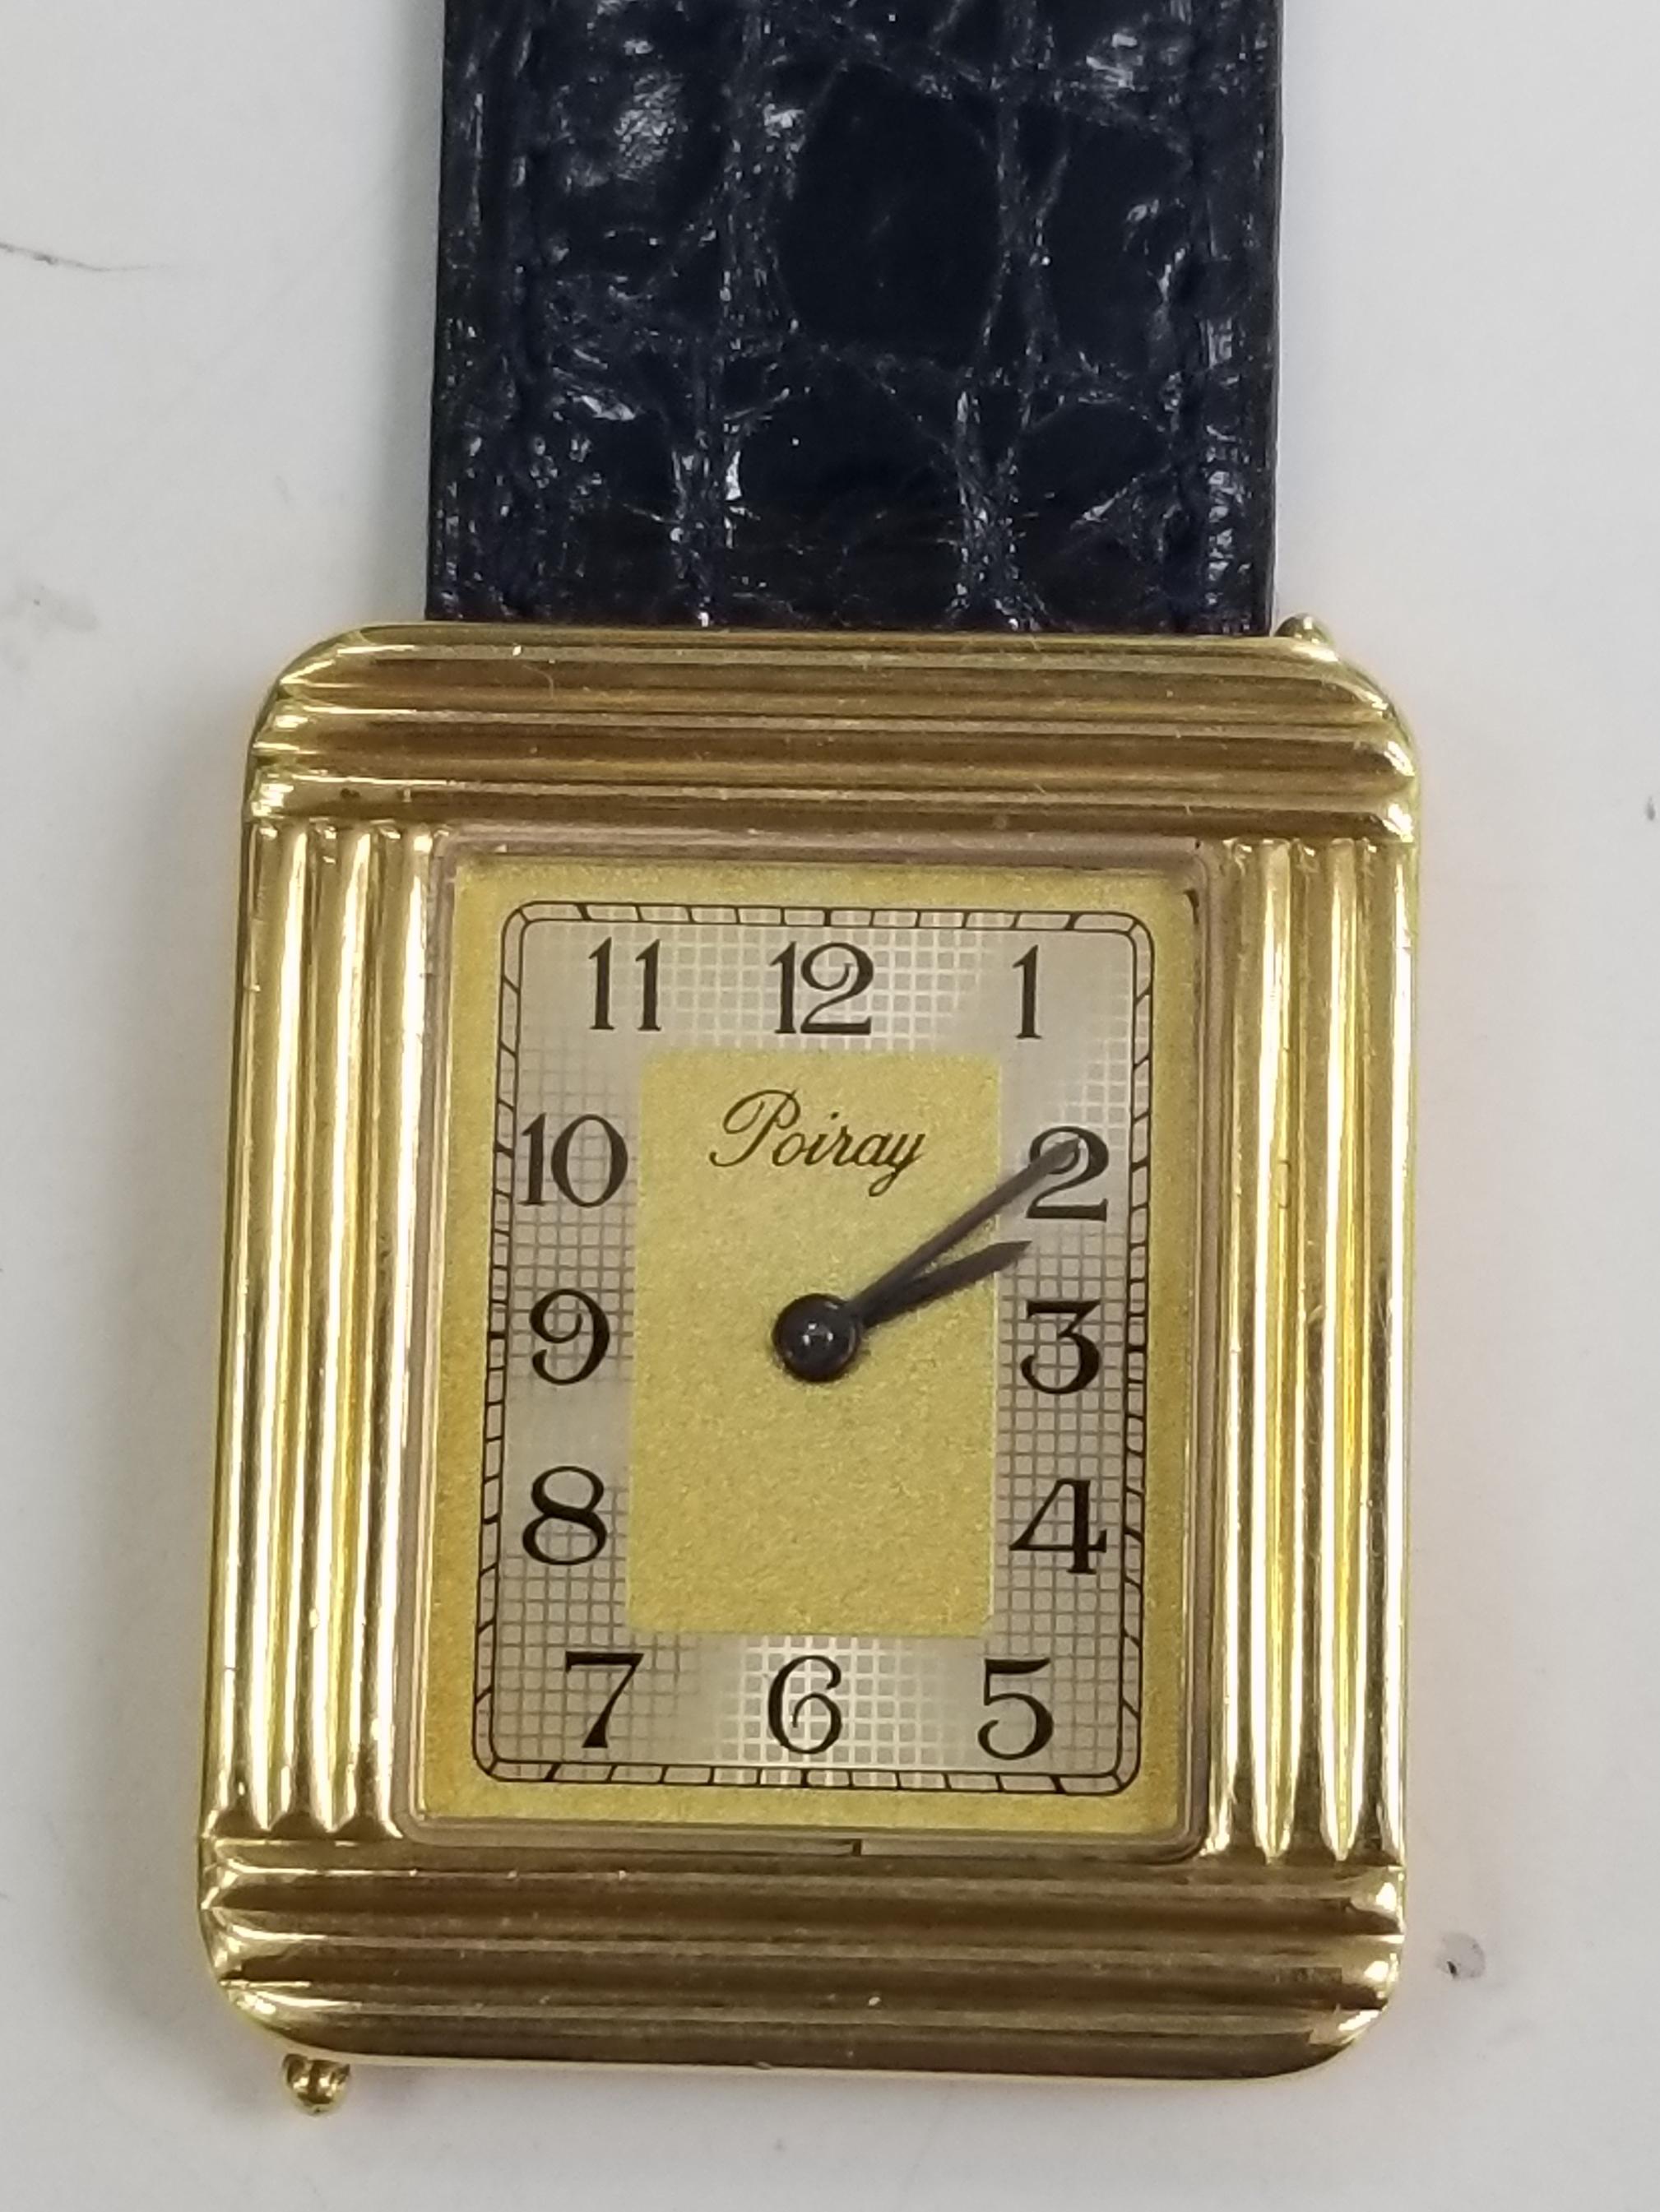 Poiray of France 18k yellow gold watch, recently serviced and a new movement was put in.  It has a unique hidden clasp and many bands or bracelets could be added.